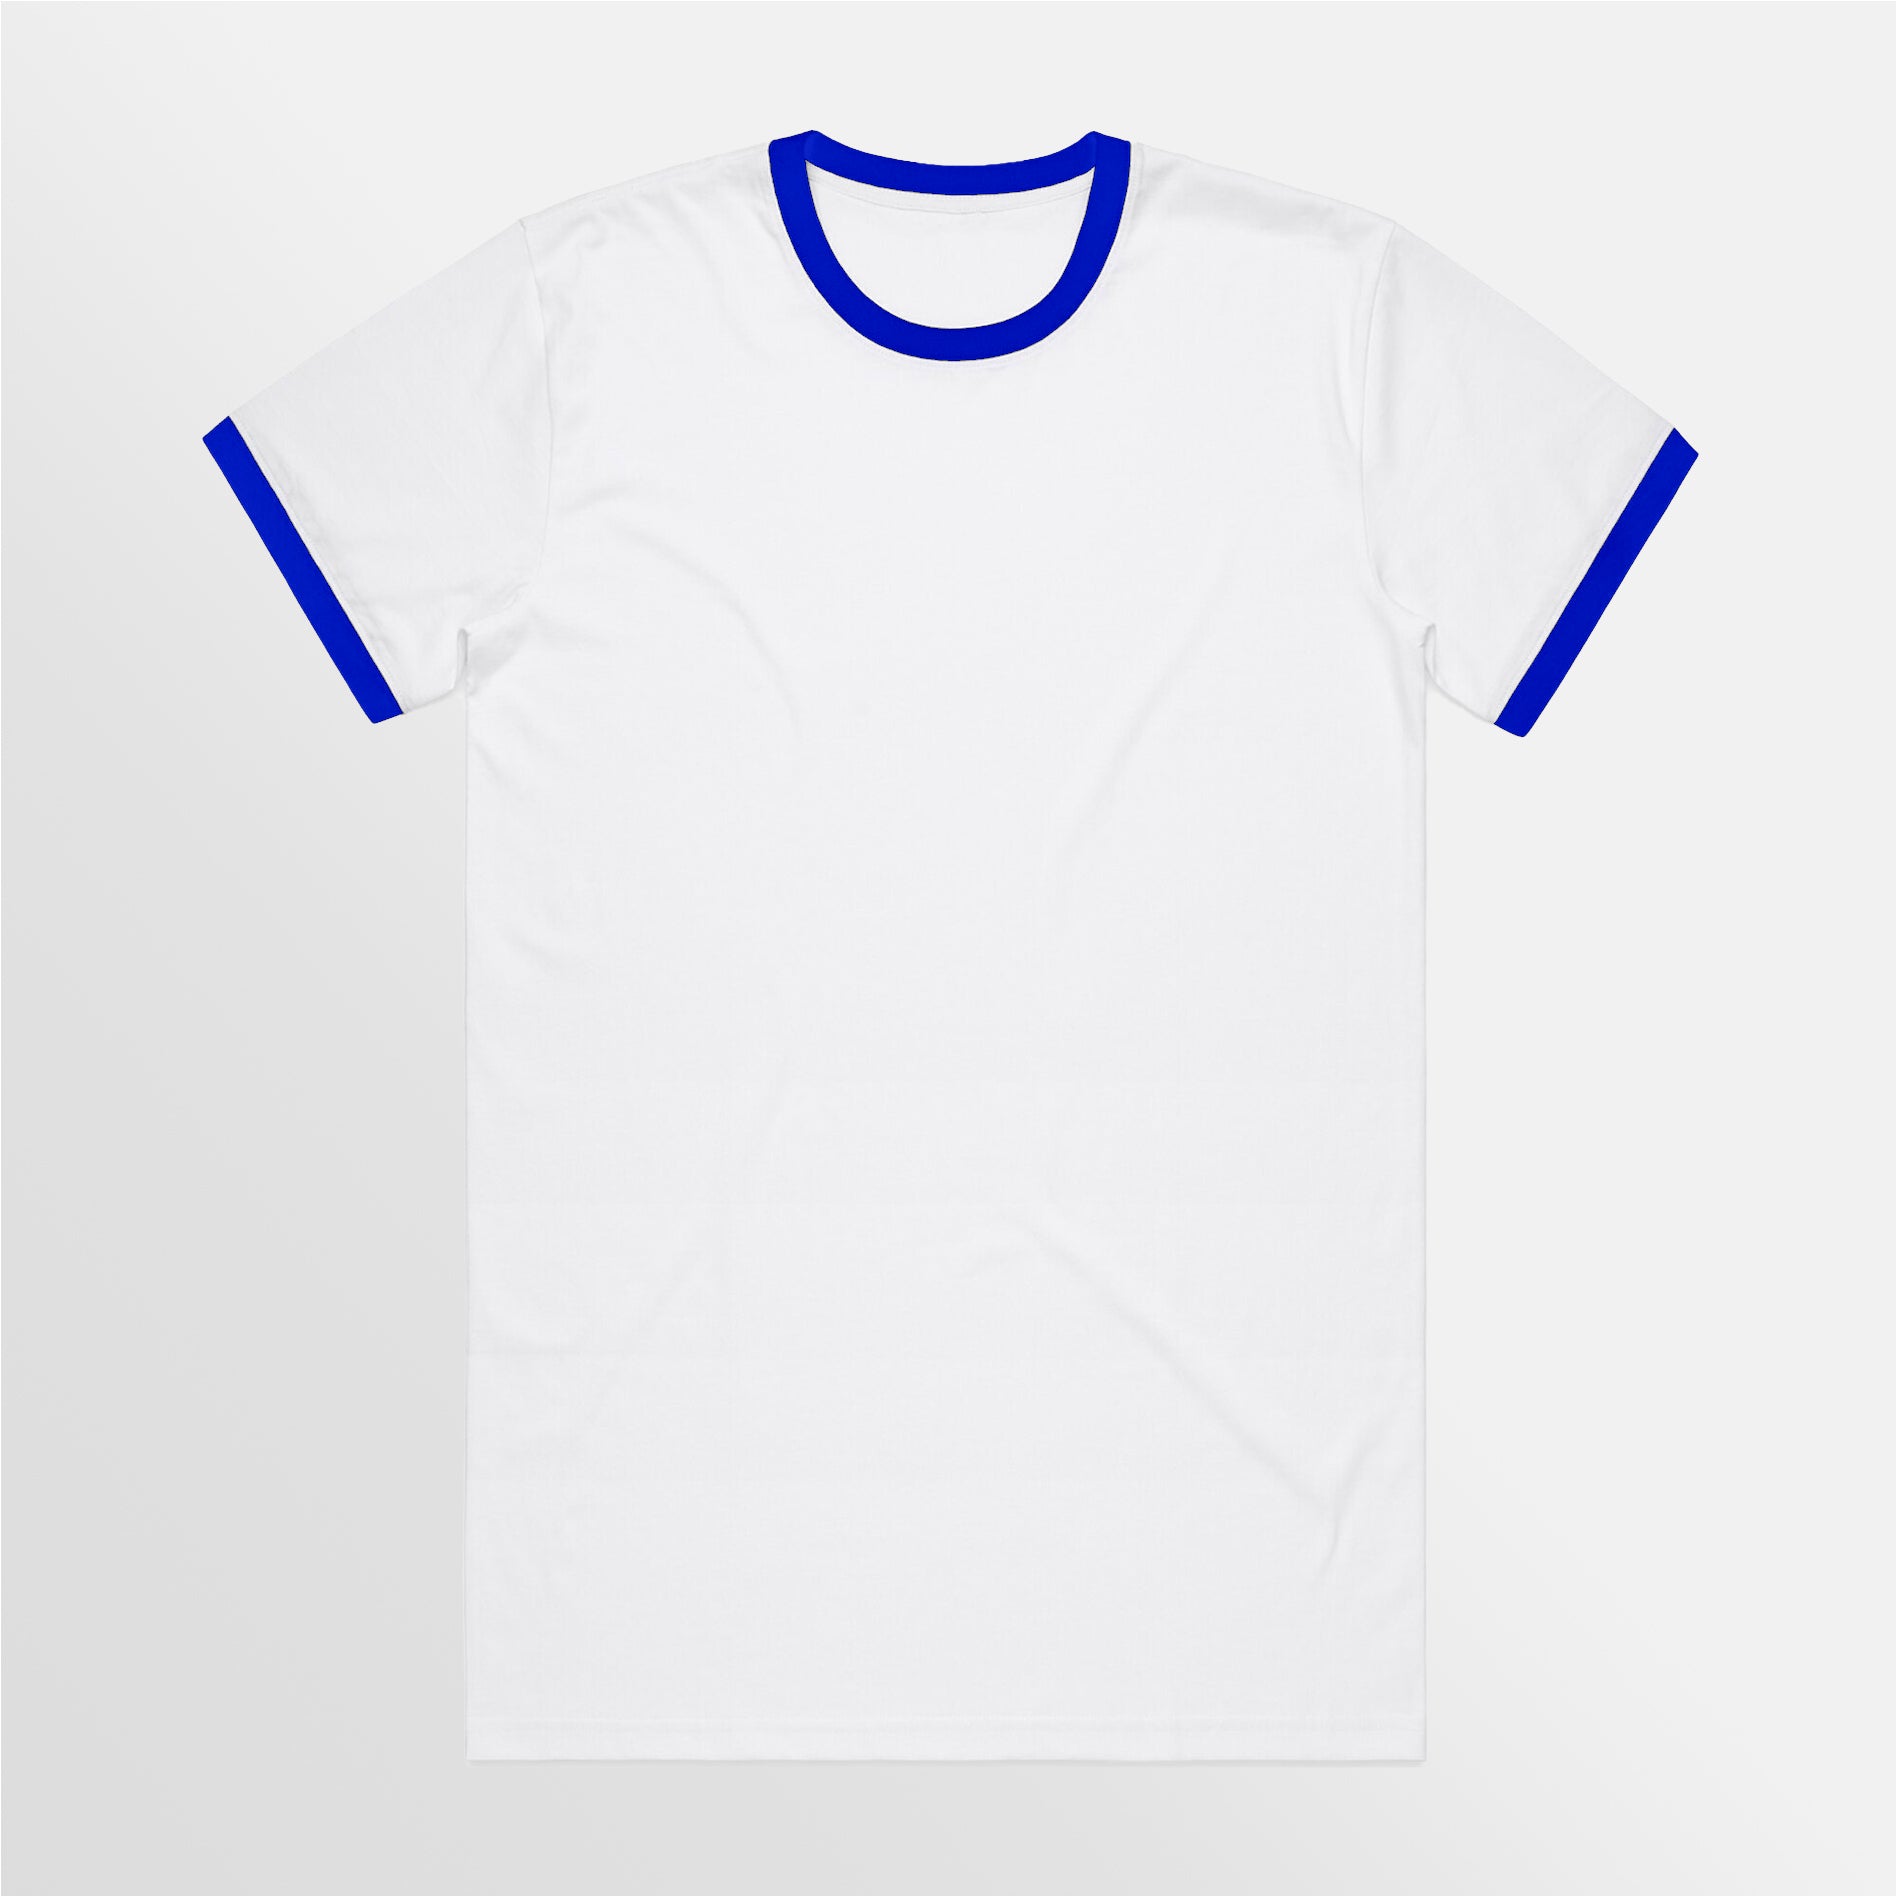 Ringer T-Shirt - On Request